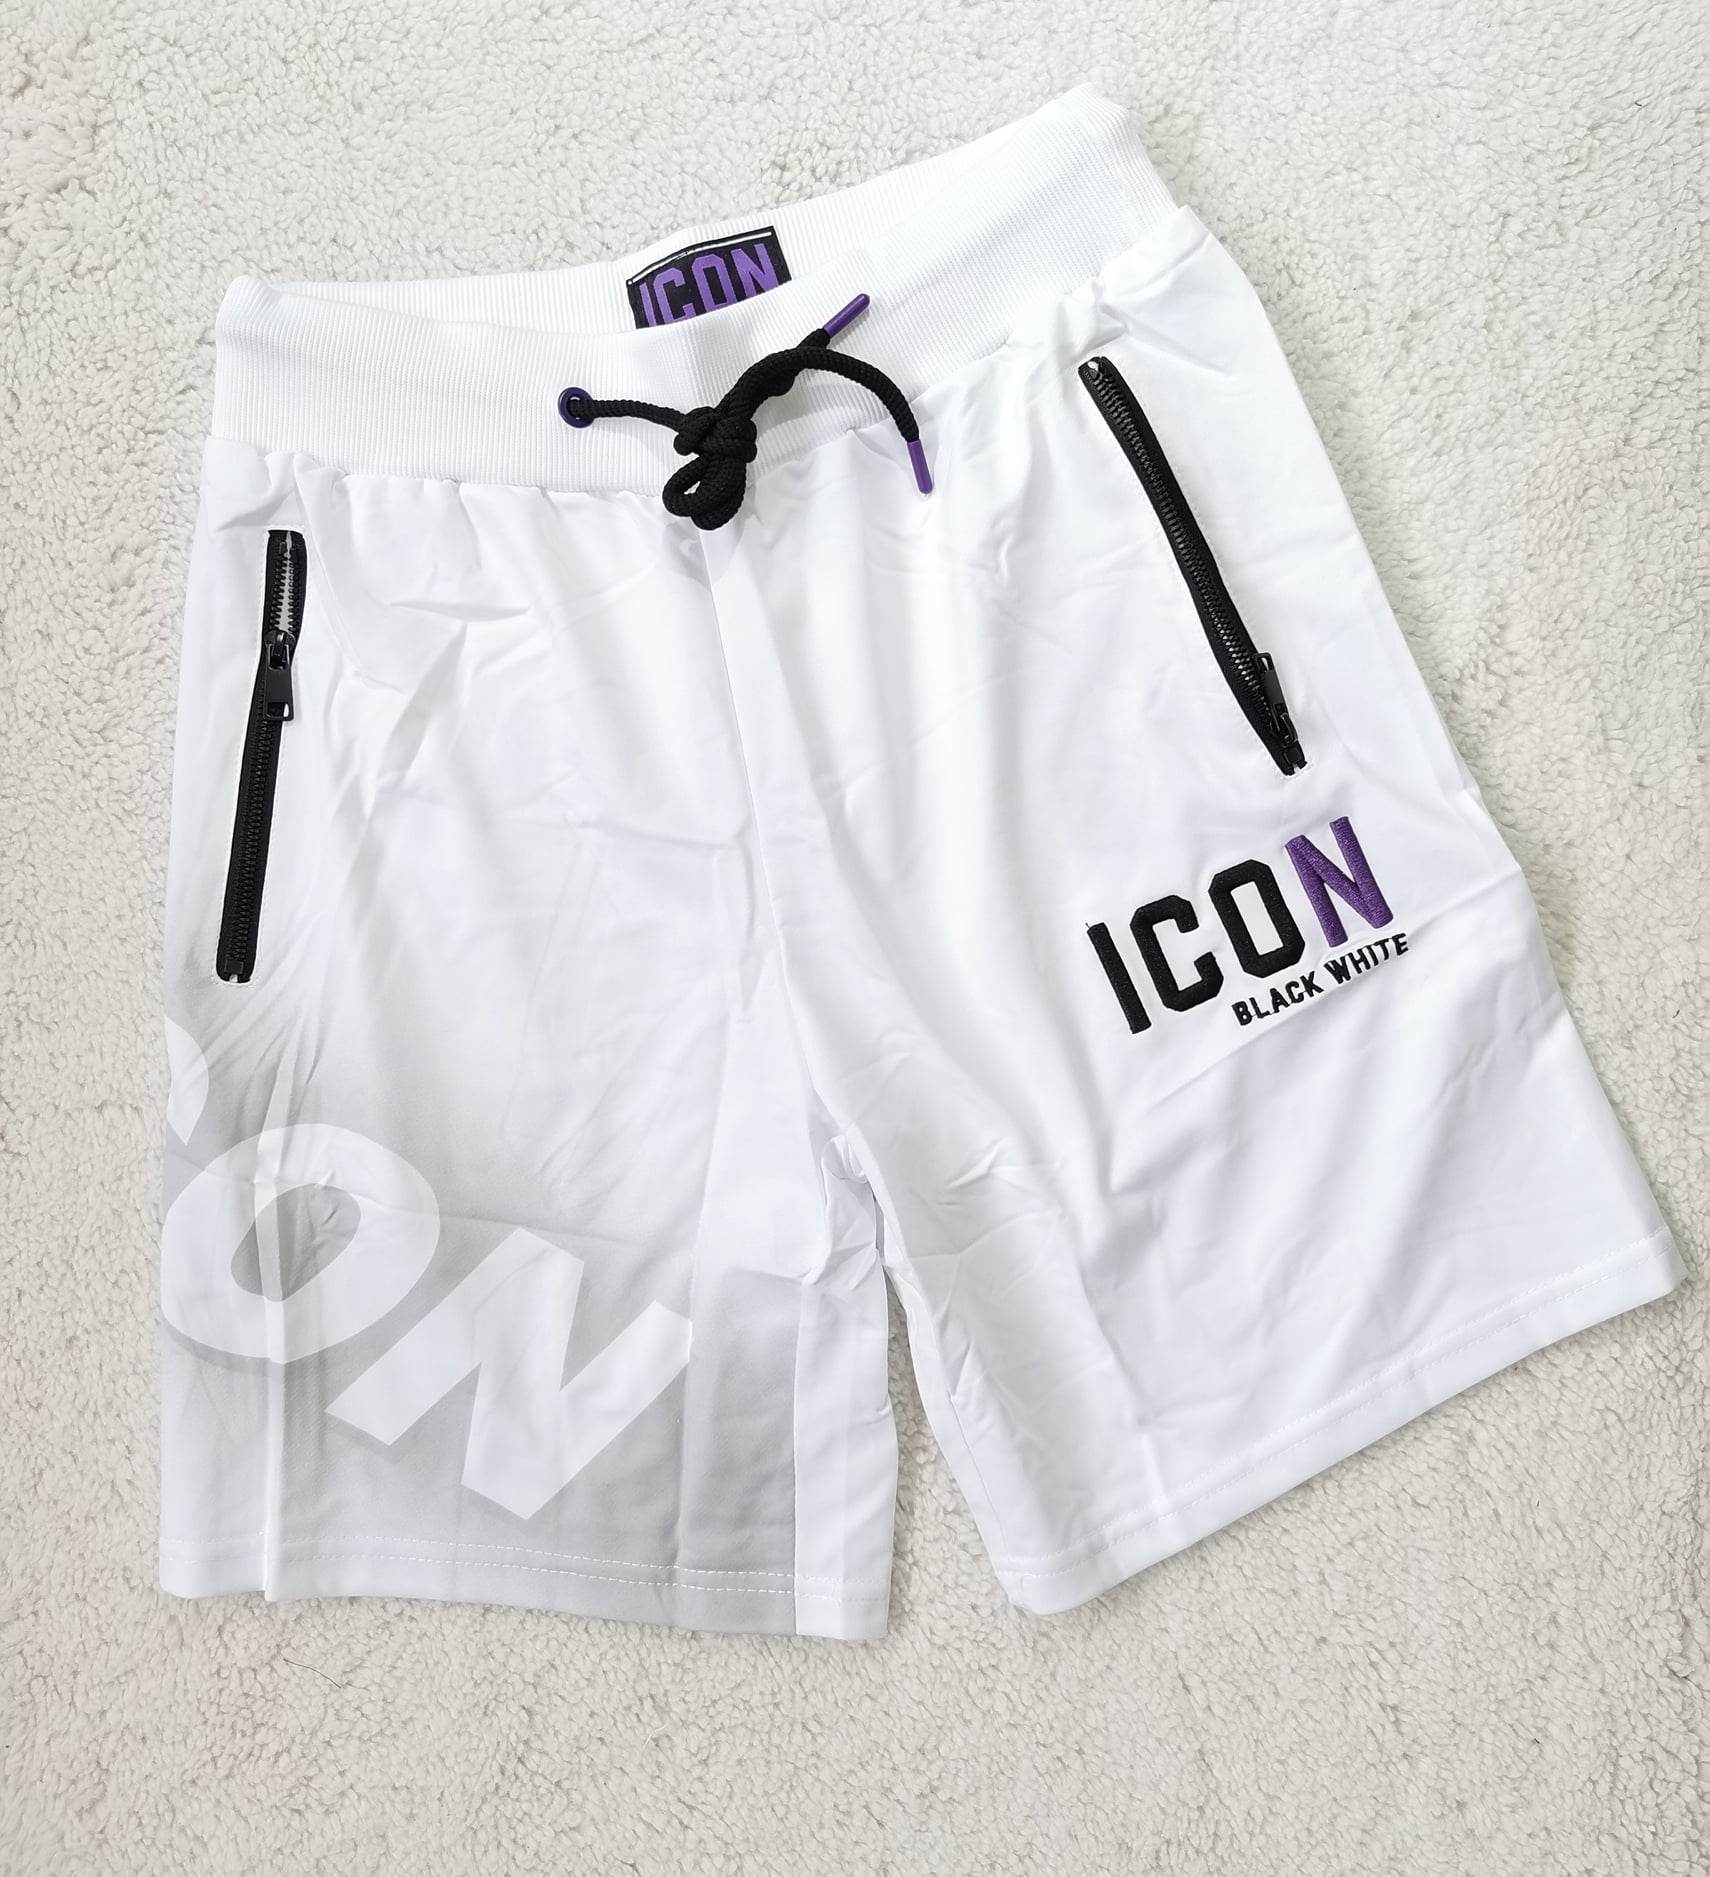 SHORTS FLEX STYLE 23/23 MONOC. WITH ICON PRINT ΜΑΝ